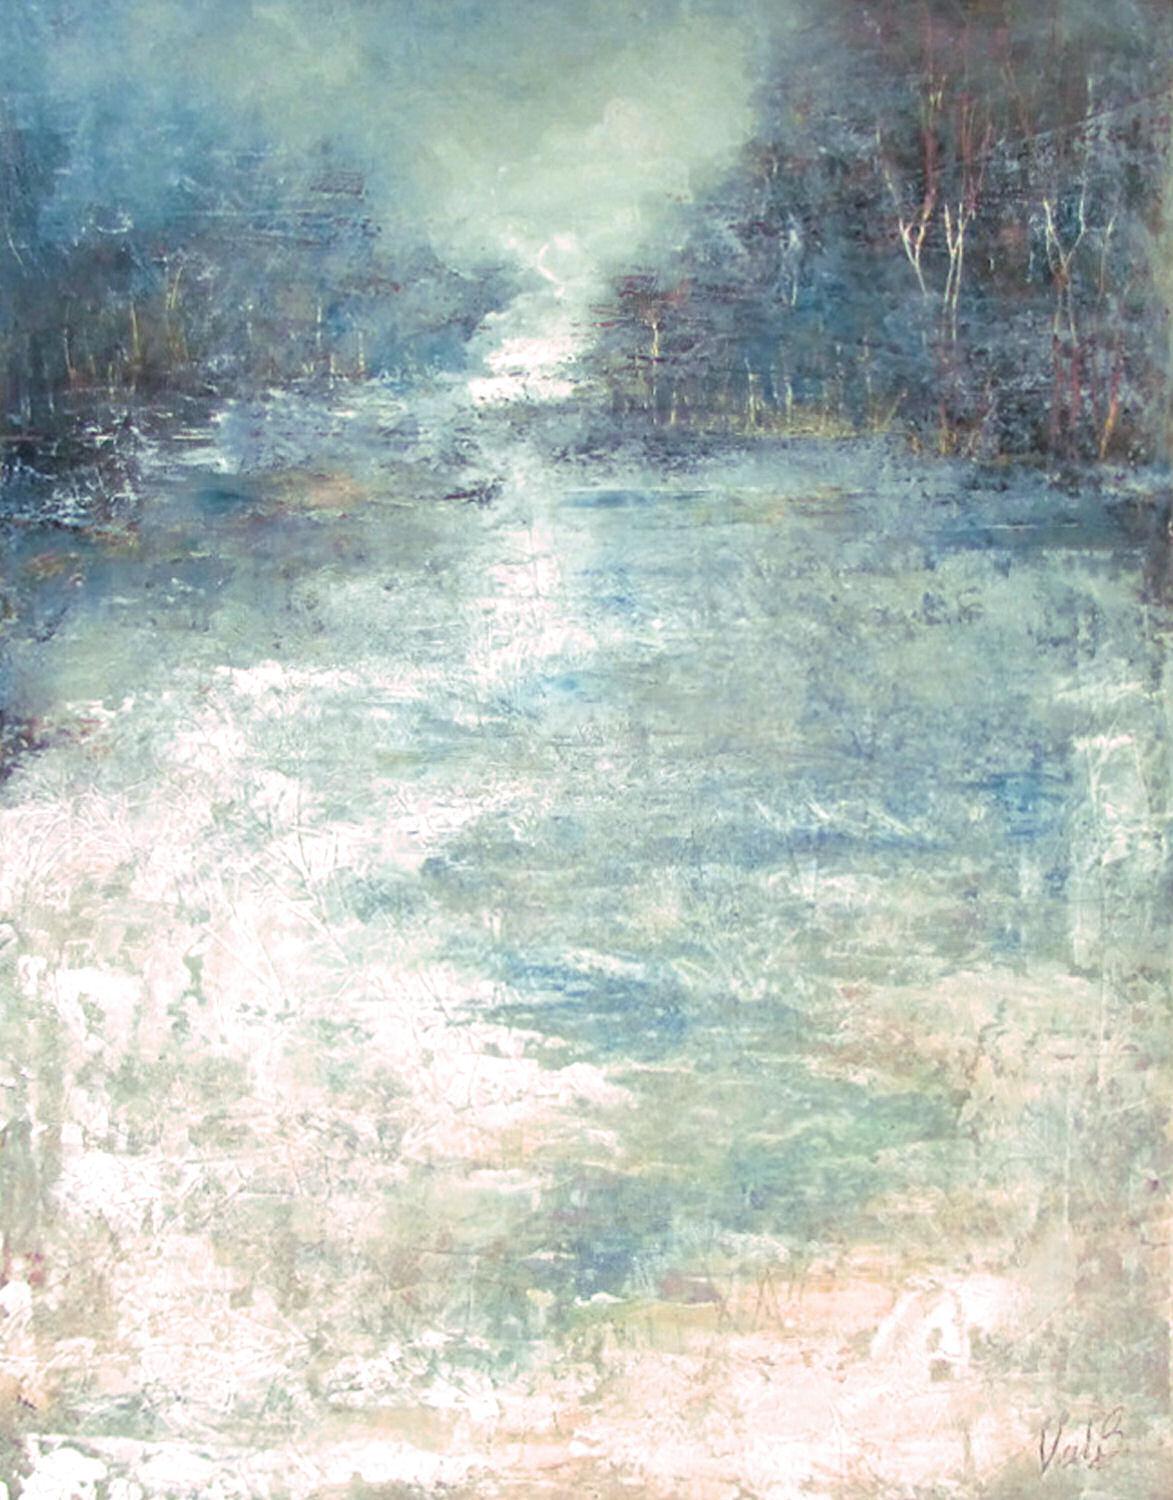 Abstract Painting Valerie Berkely - Song d'hiver, peinture à l'huile abstraite